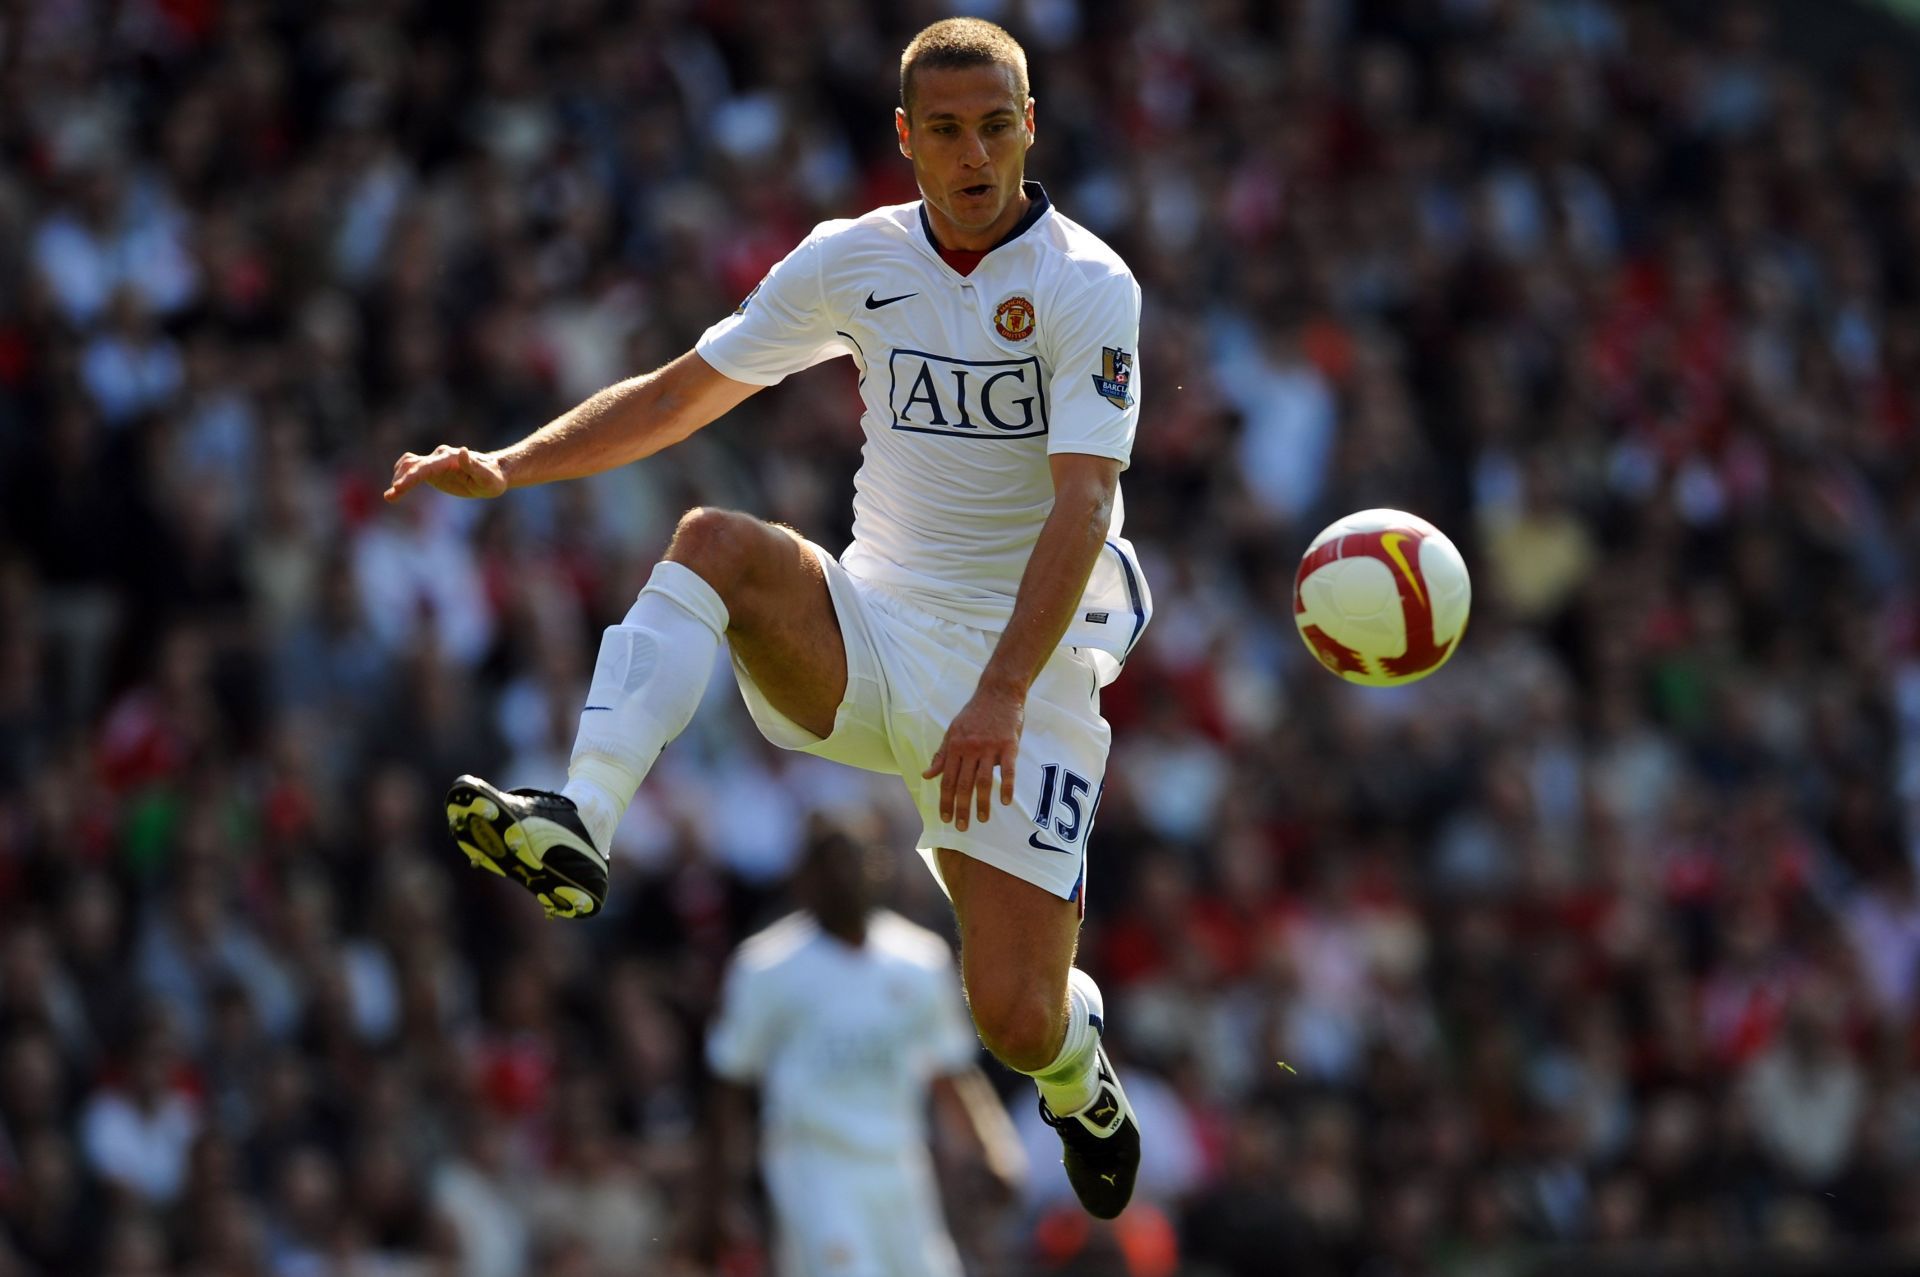 Nemanja Vidic is one of the greatest centre-backs to have ever played in the Premier League